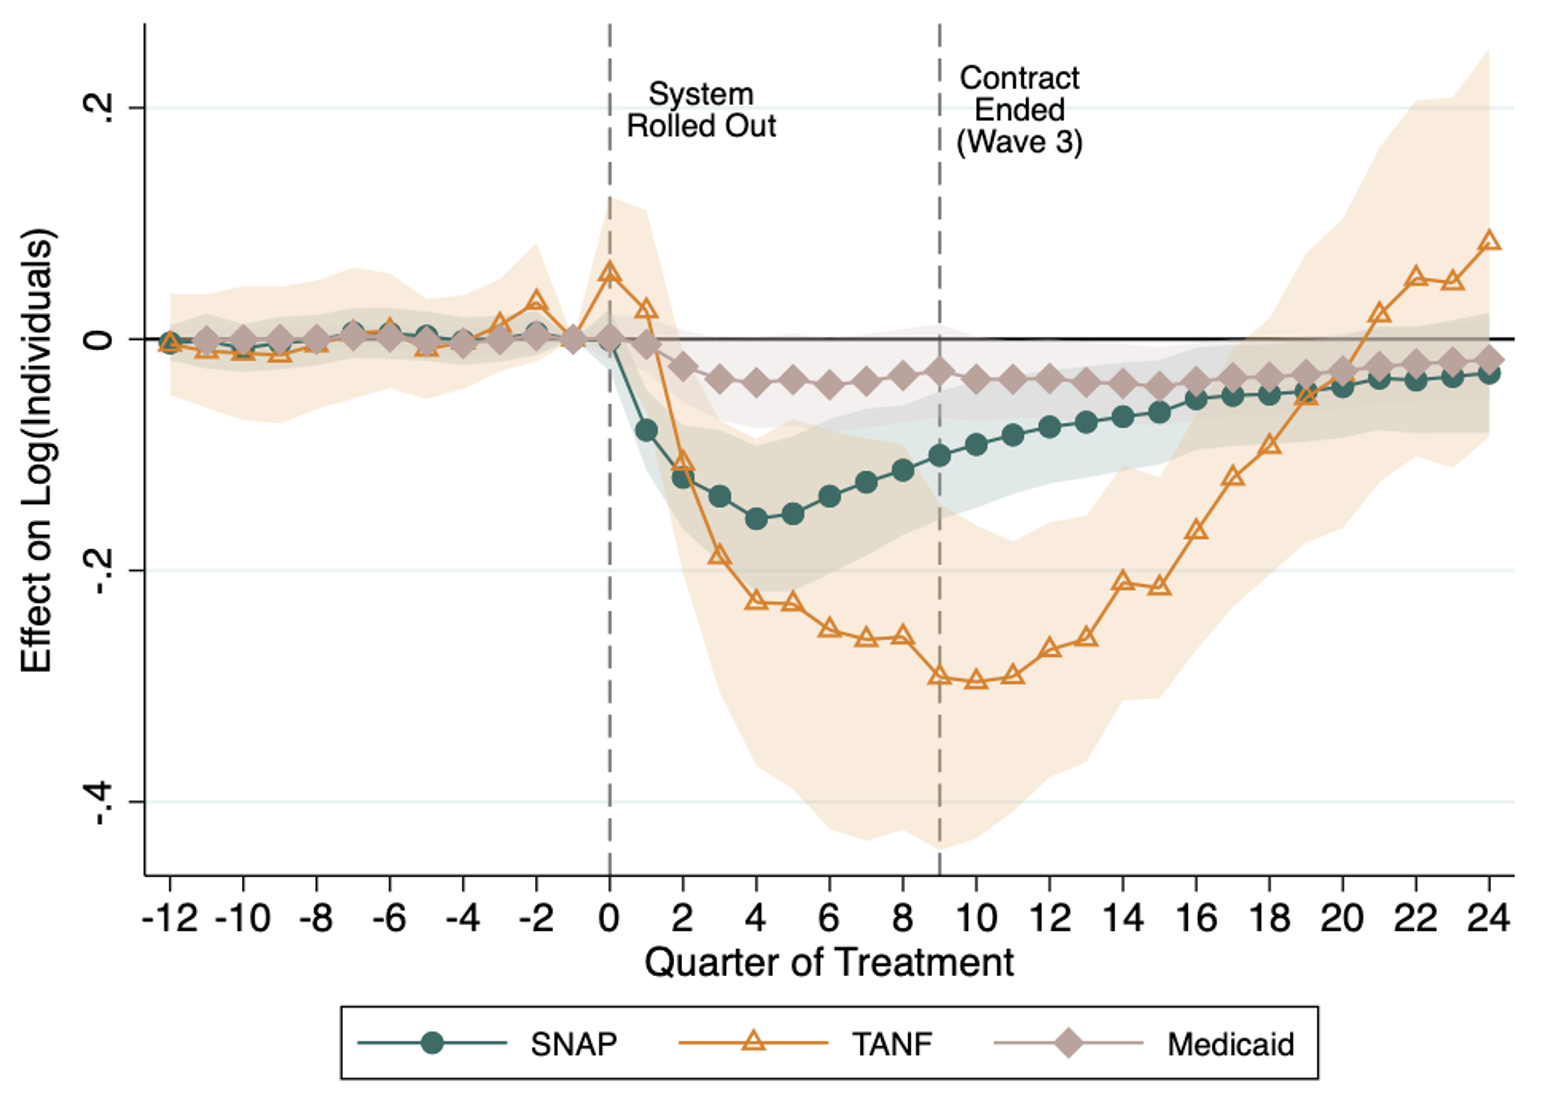 Figure 1 Effects of IBM’s automated system on enrollment in SNAP, TANF, and Medicaid